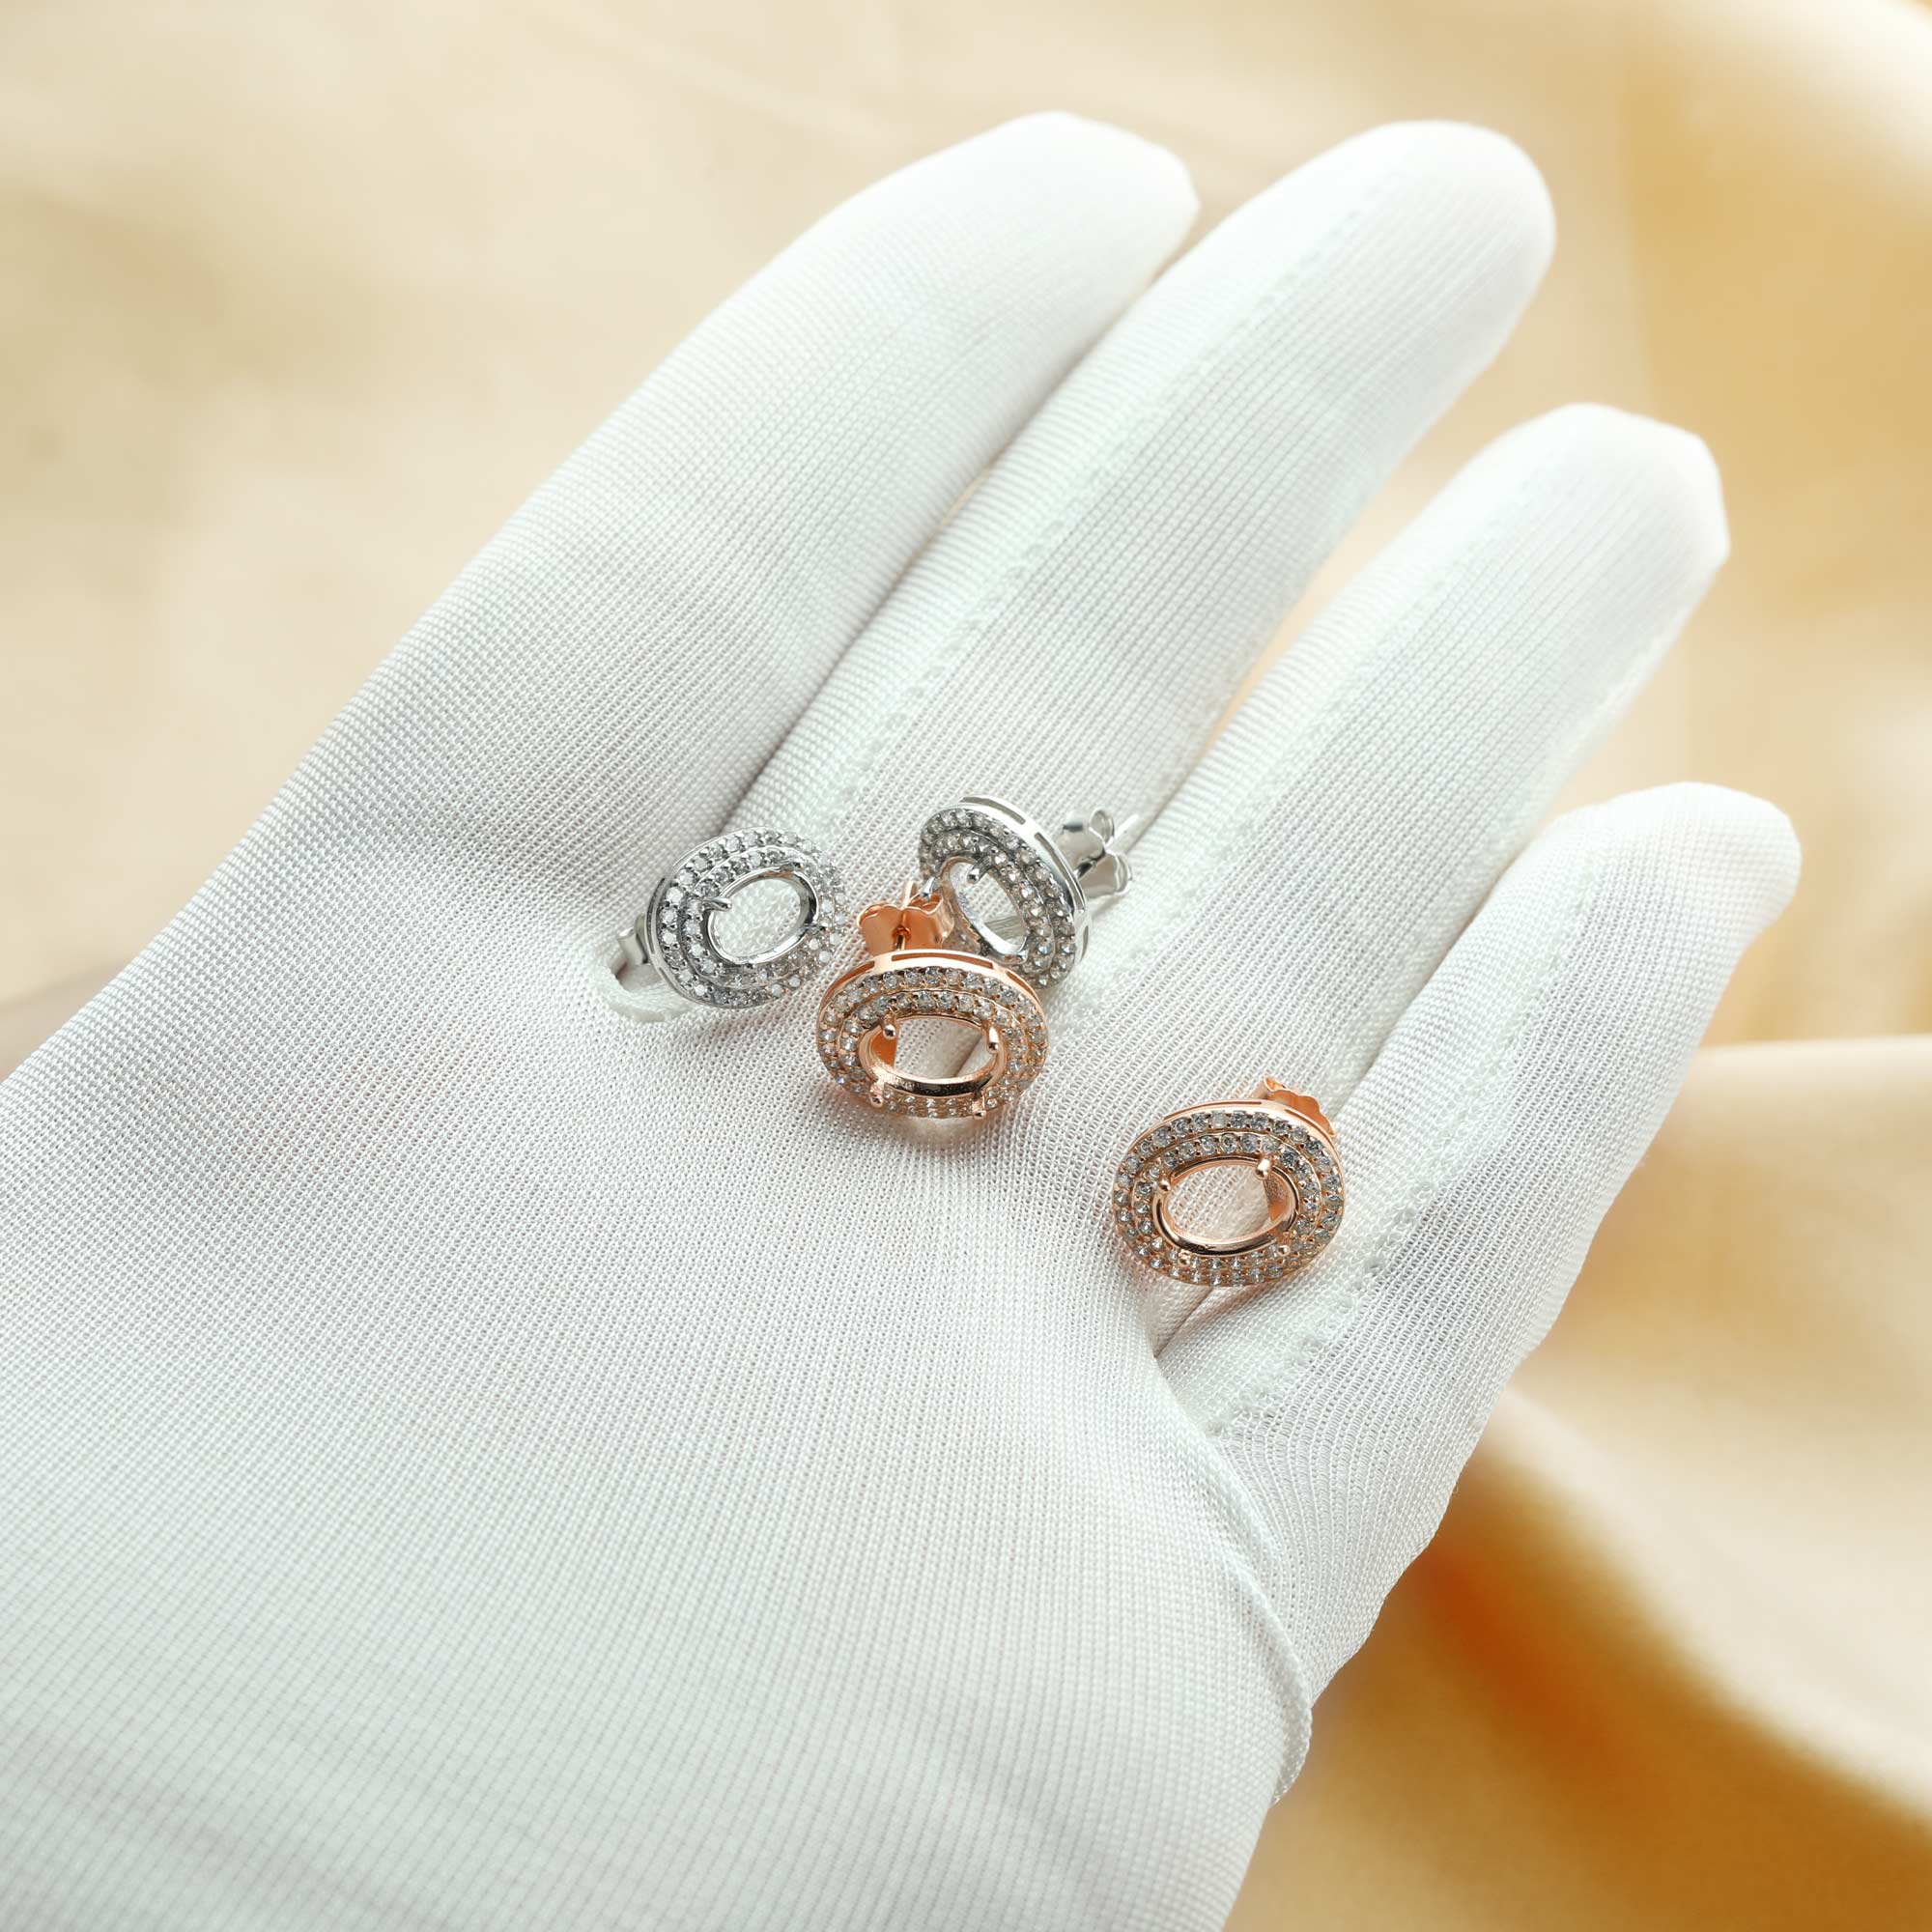 1Pair Multiple Sizes Oval Solid 925 Sterling Silver Rose Gold Tone DIY Prong Studs Earrings Settings Bezel With Cubic Zirconia 1706025 - Click Image to Close